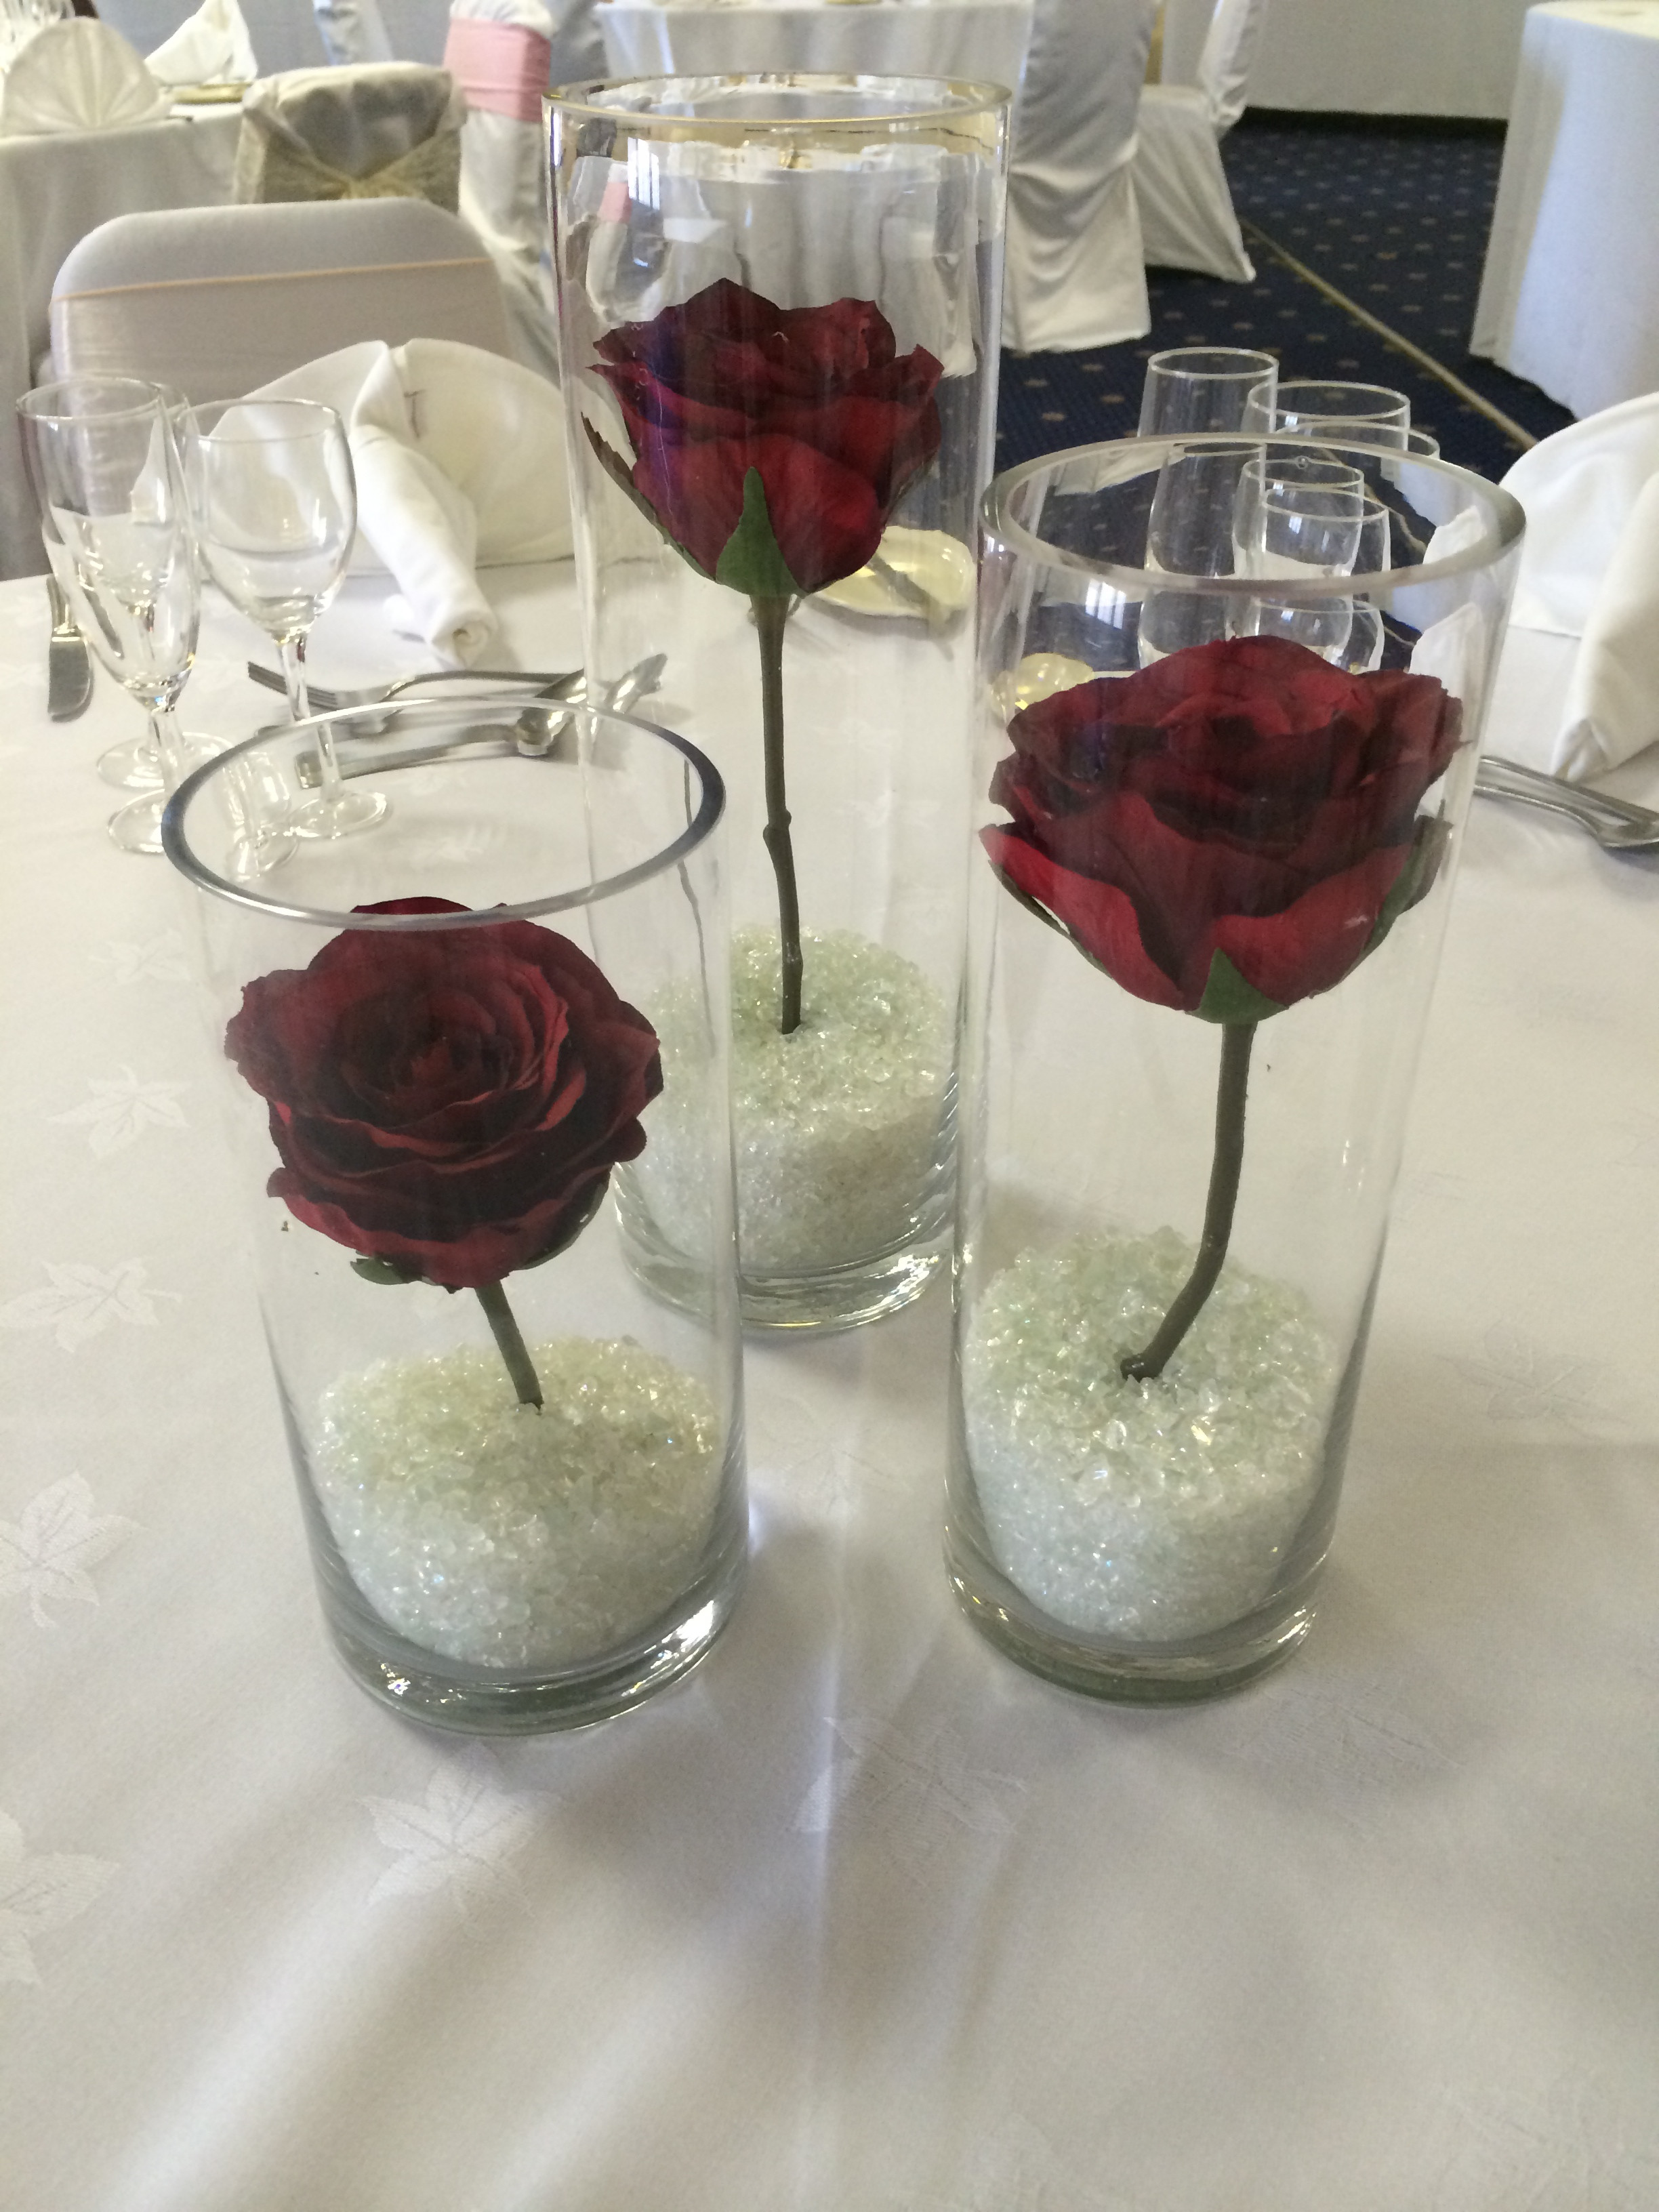 11 Popular Red Rose Vase 2024 free download red rose vase of chair table vase decorations mirror small cylinder square glass inside chair marvelous table vase decorations 0 cylinder red rose table vase decorations